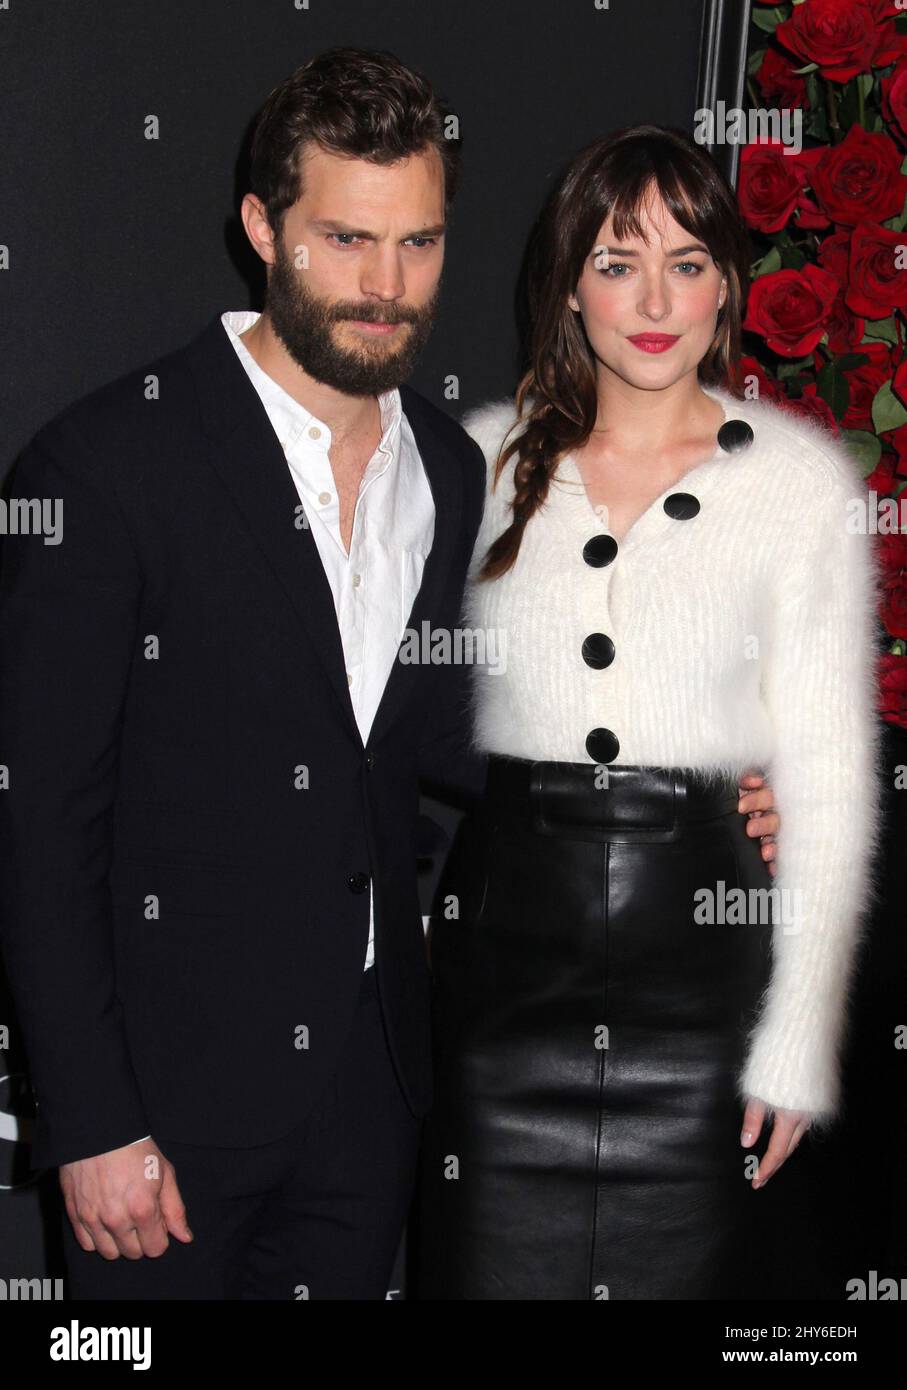 Jamie Dornan and Dakota Johnson attending the premiere of Fifty Shades of Grey in New York. Stock Photo